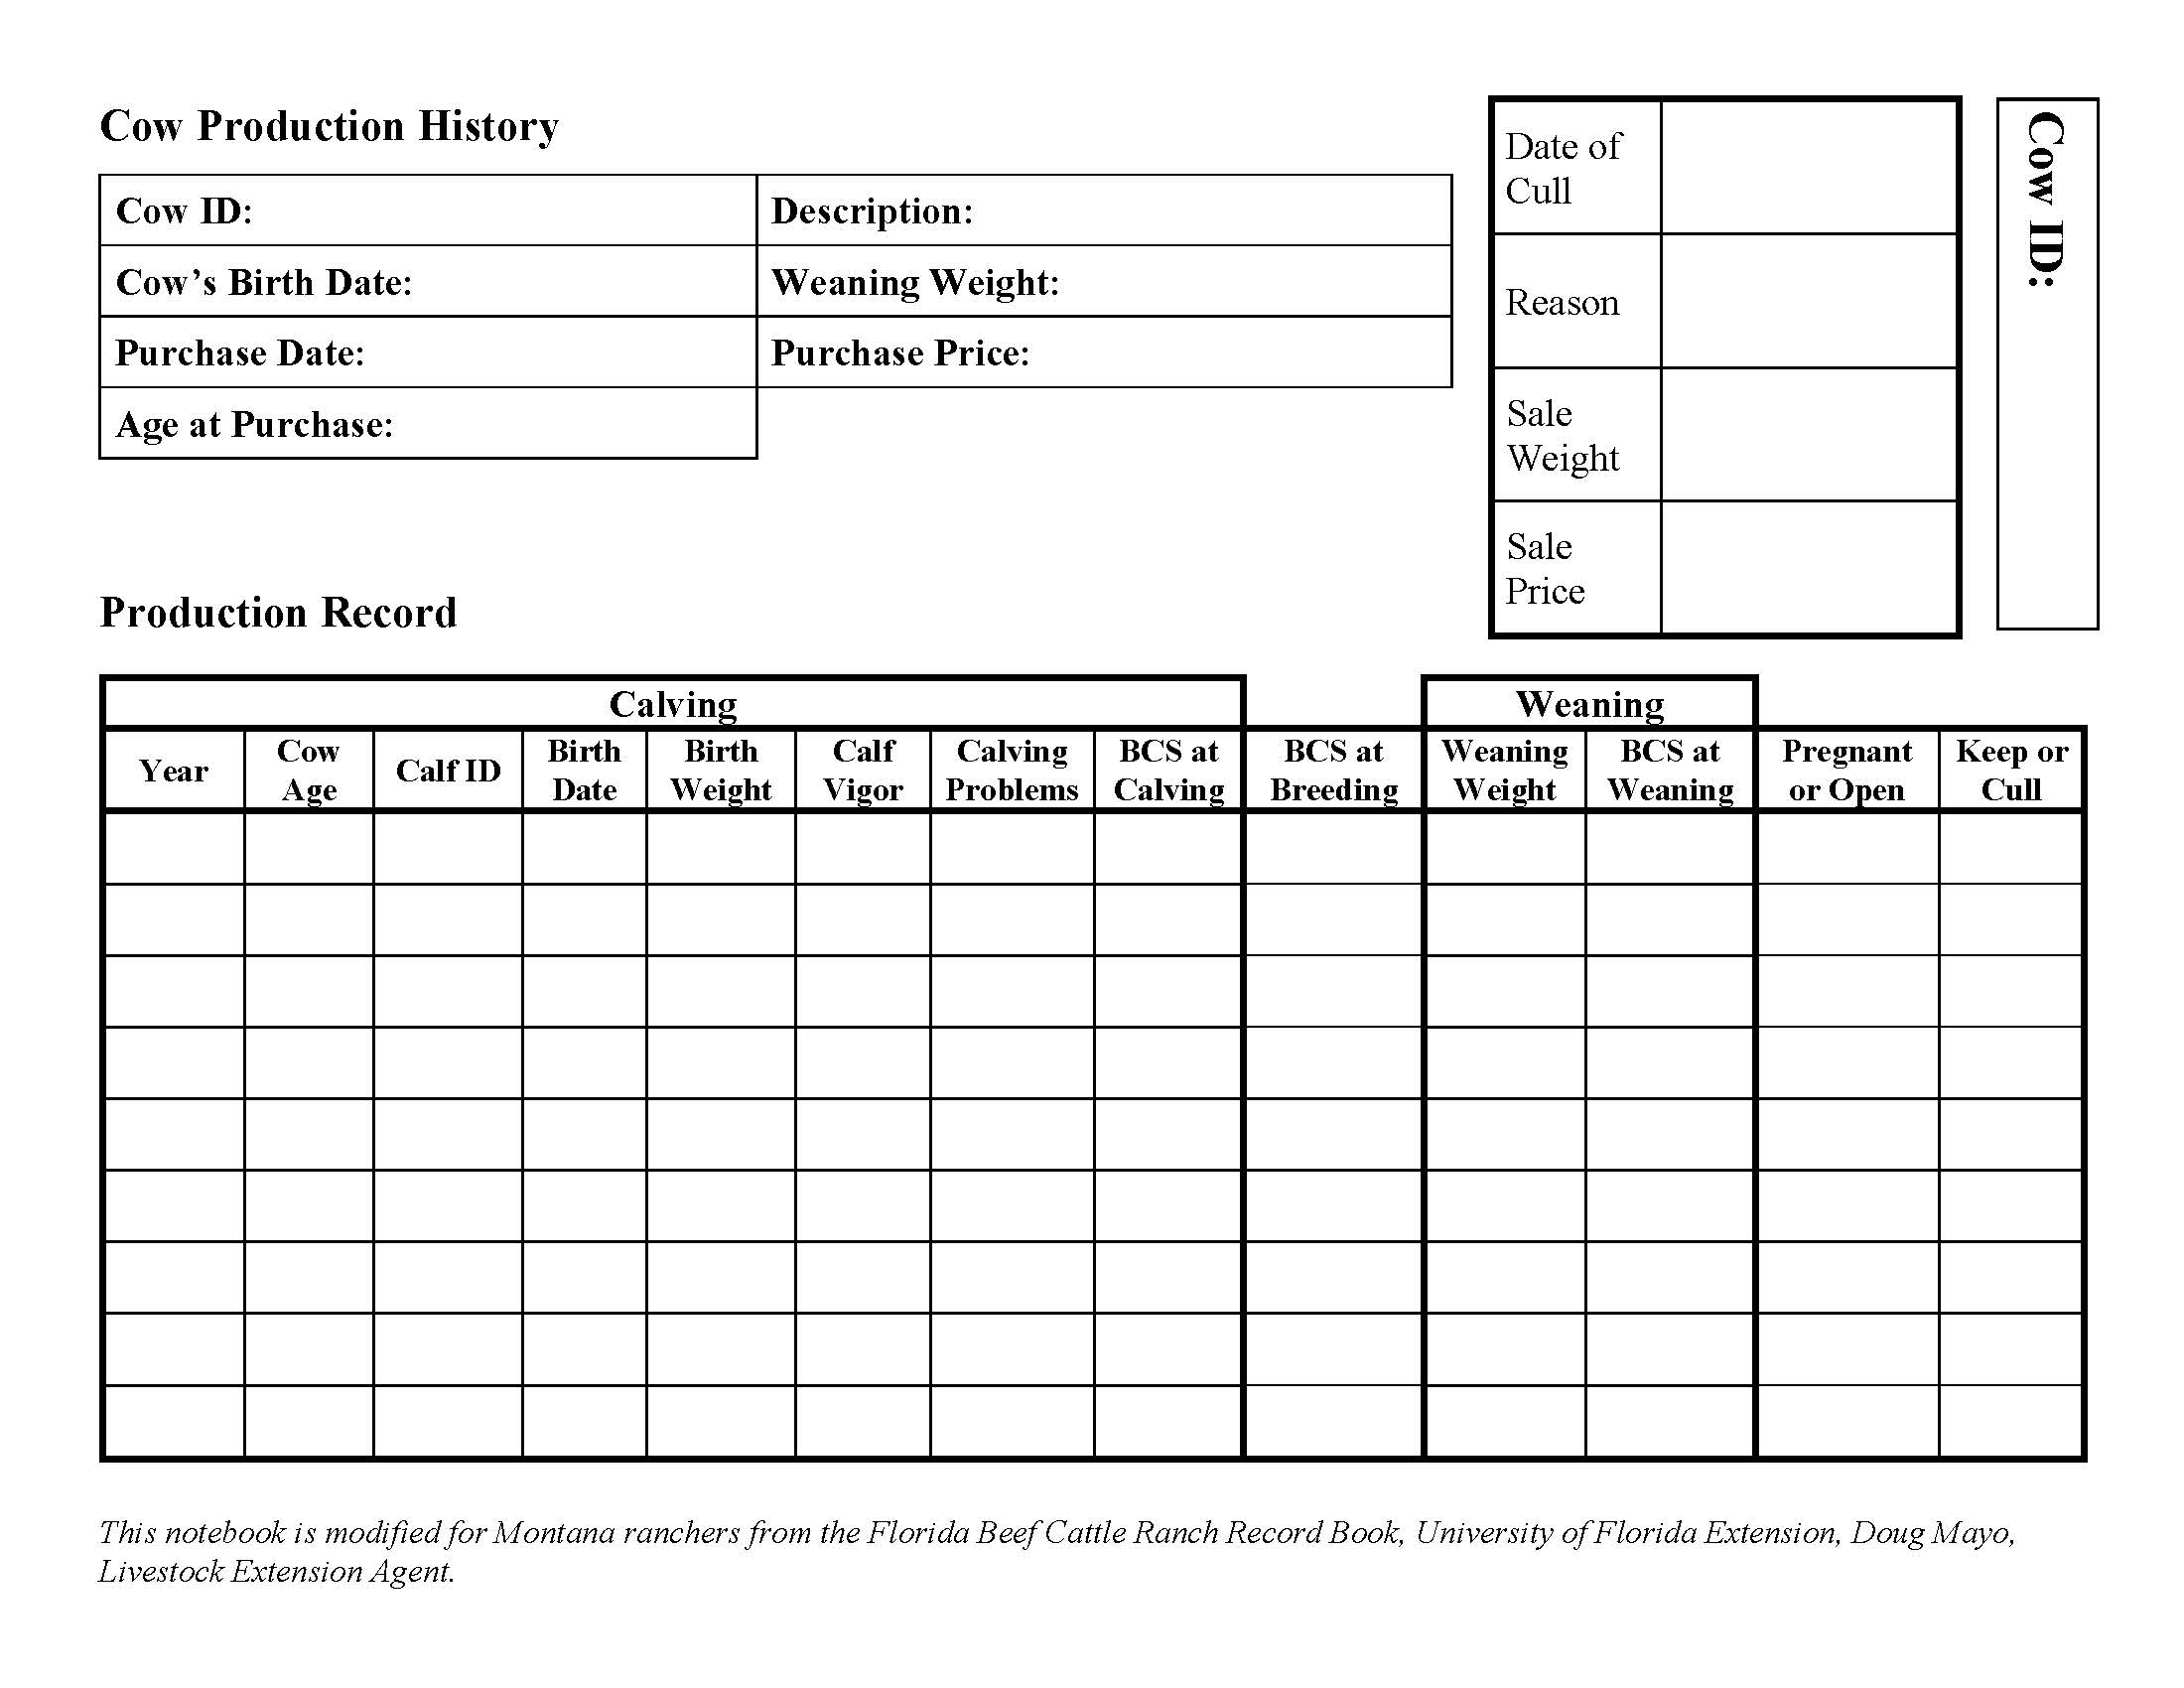 A sample table used for keeping cow production history records. Used in the rancher notebook.